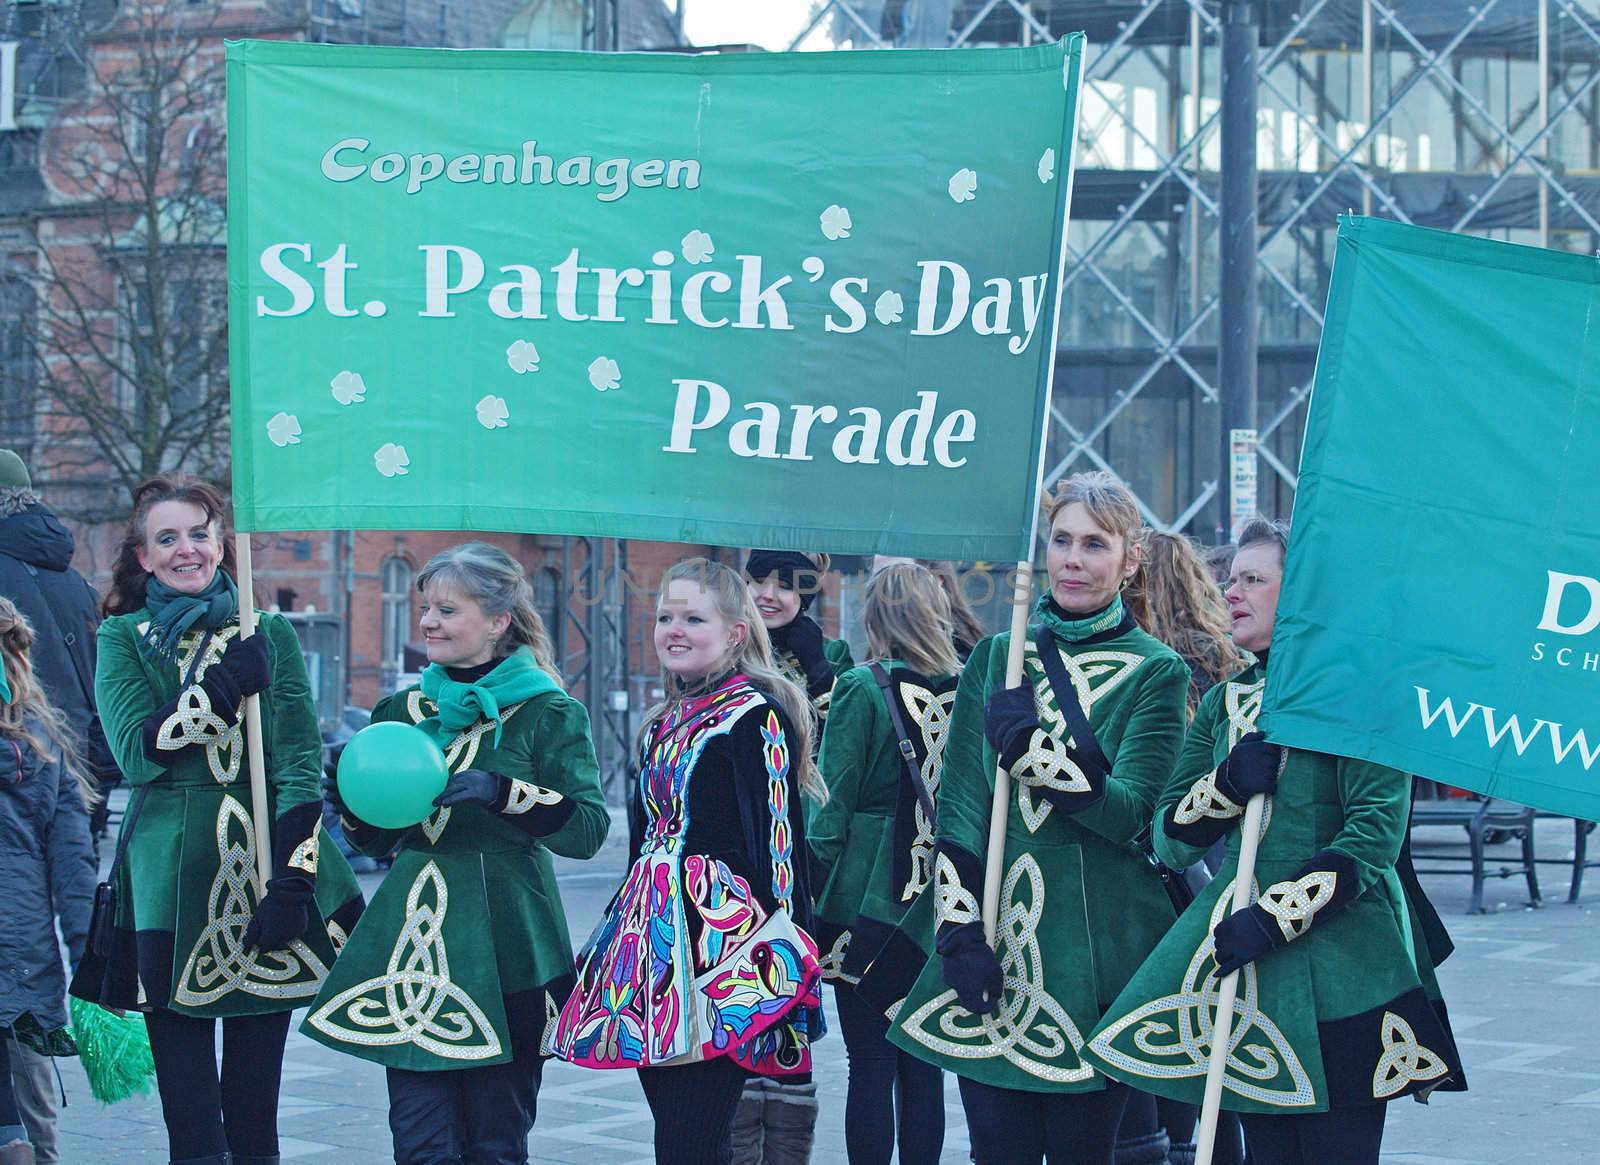 participants at st. patrick's day parade by Ric510